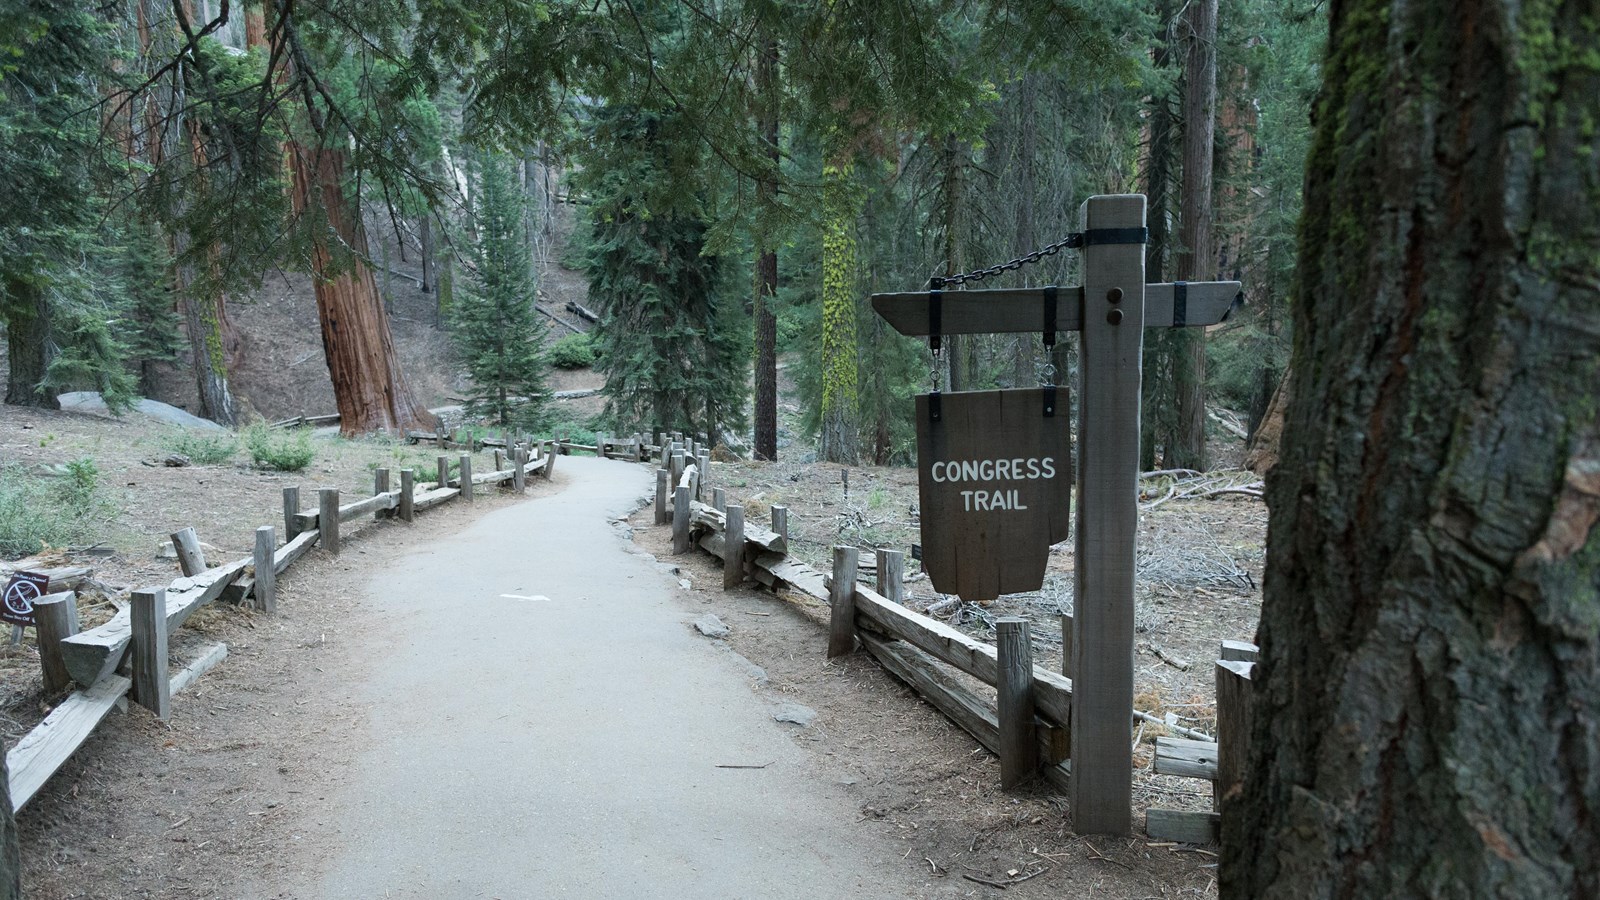 A paved path runs inbetween a wooden fence. On the other sides of the fence are giant sequoia trees